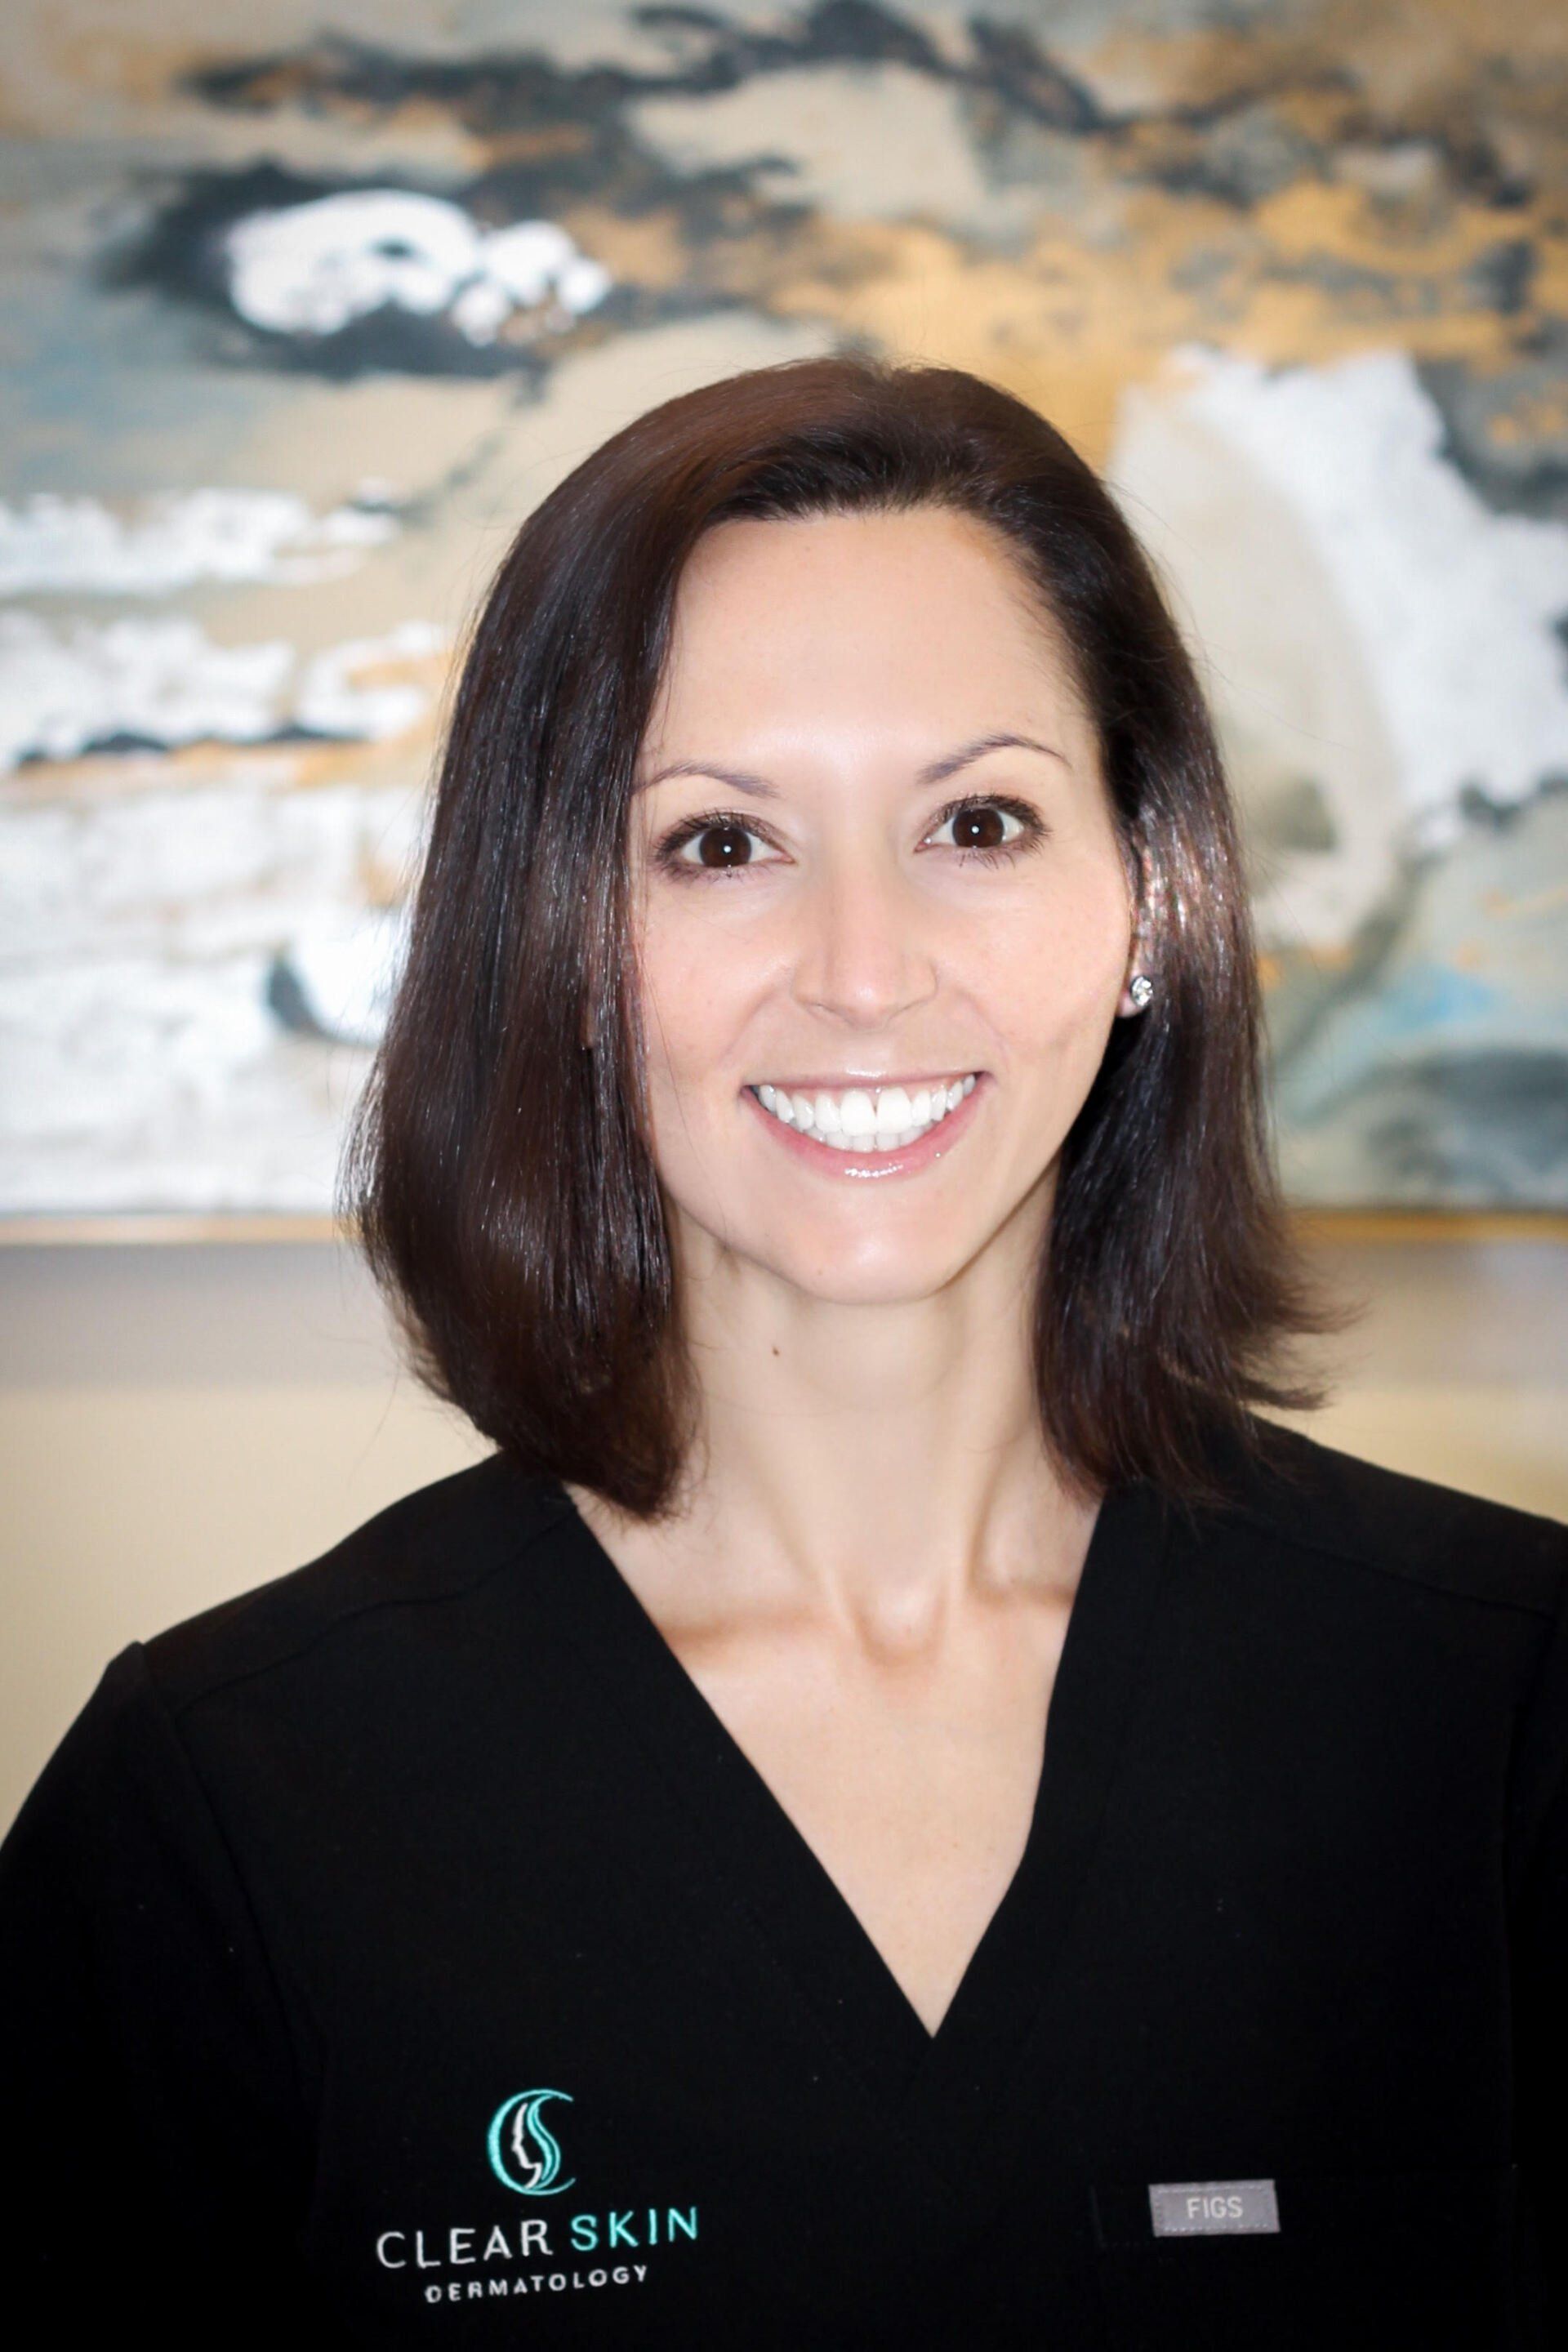 Photo of Jillian Clavenna, a board certified physician assistant at Clear Skin Dermatology.